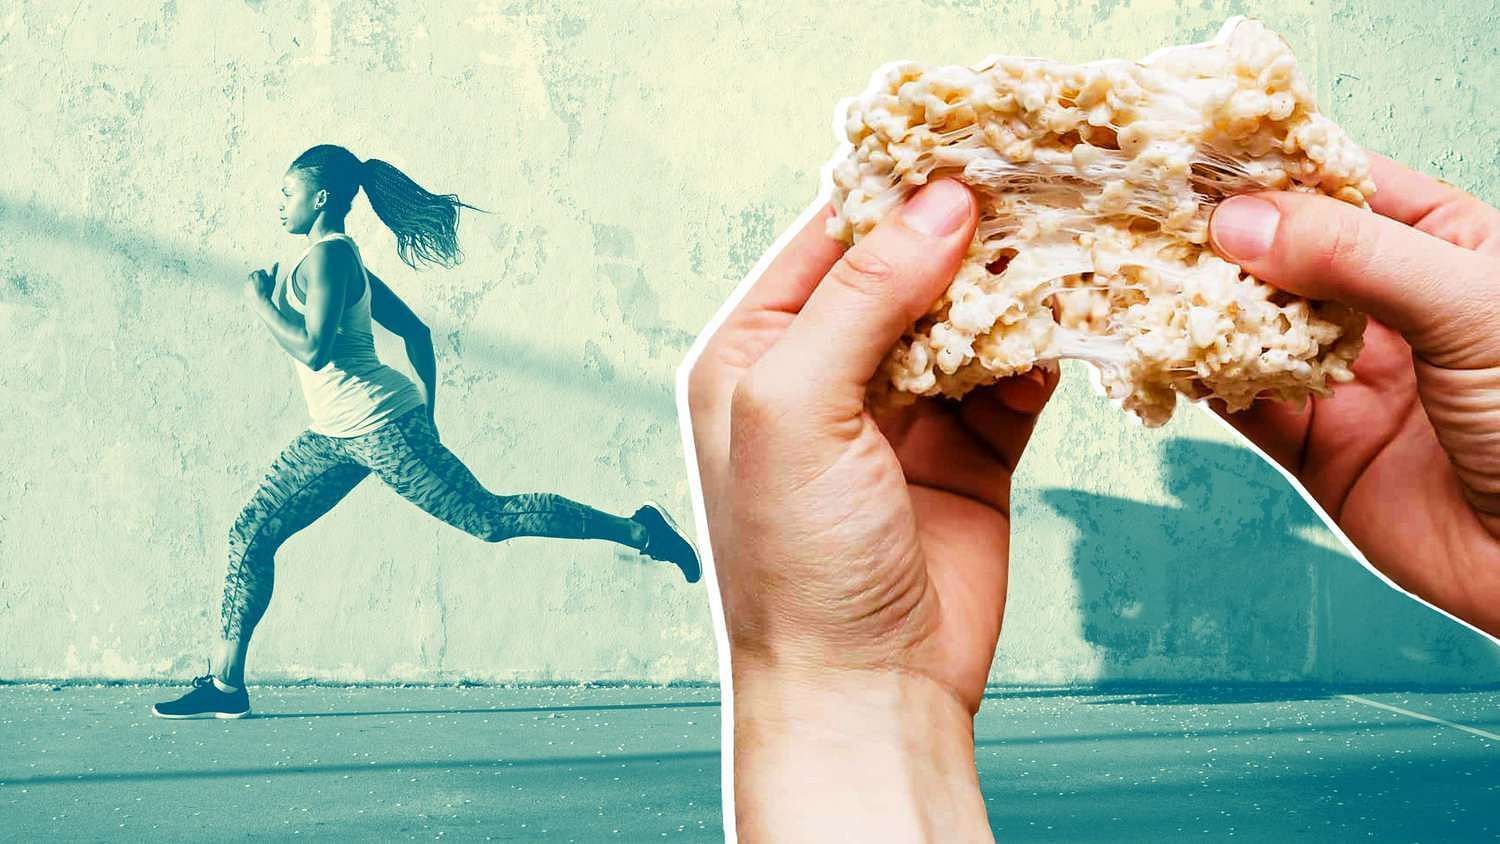 If you intend to undertake a long workout, Krispies Treat may not be the best option. (Getty Images)